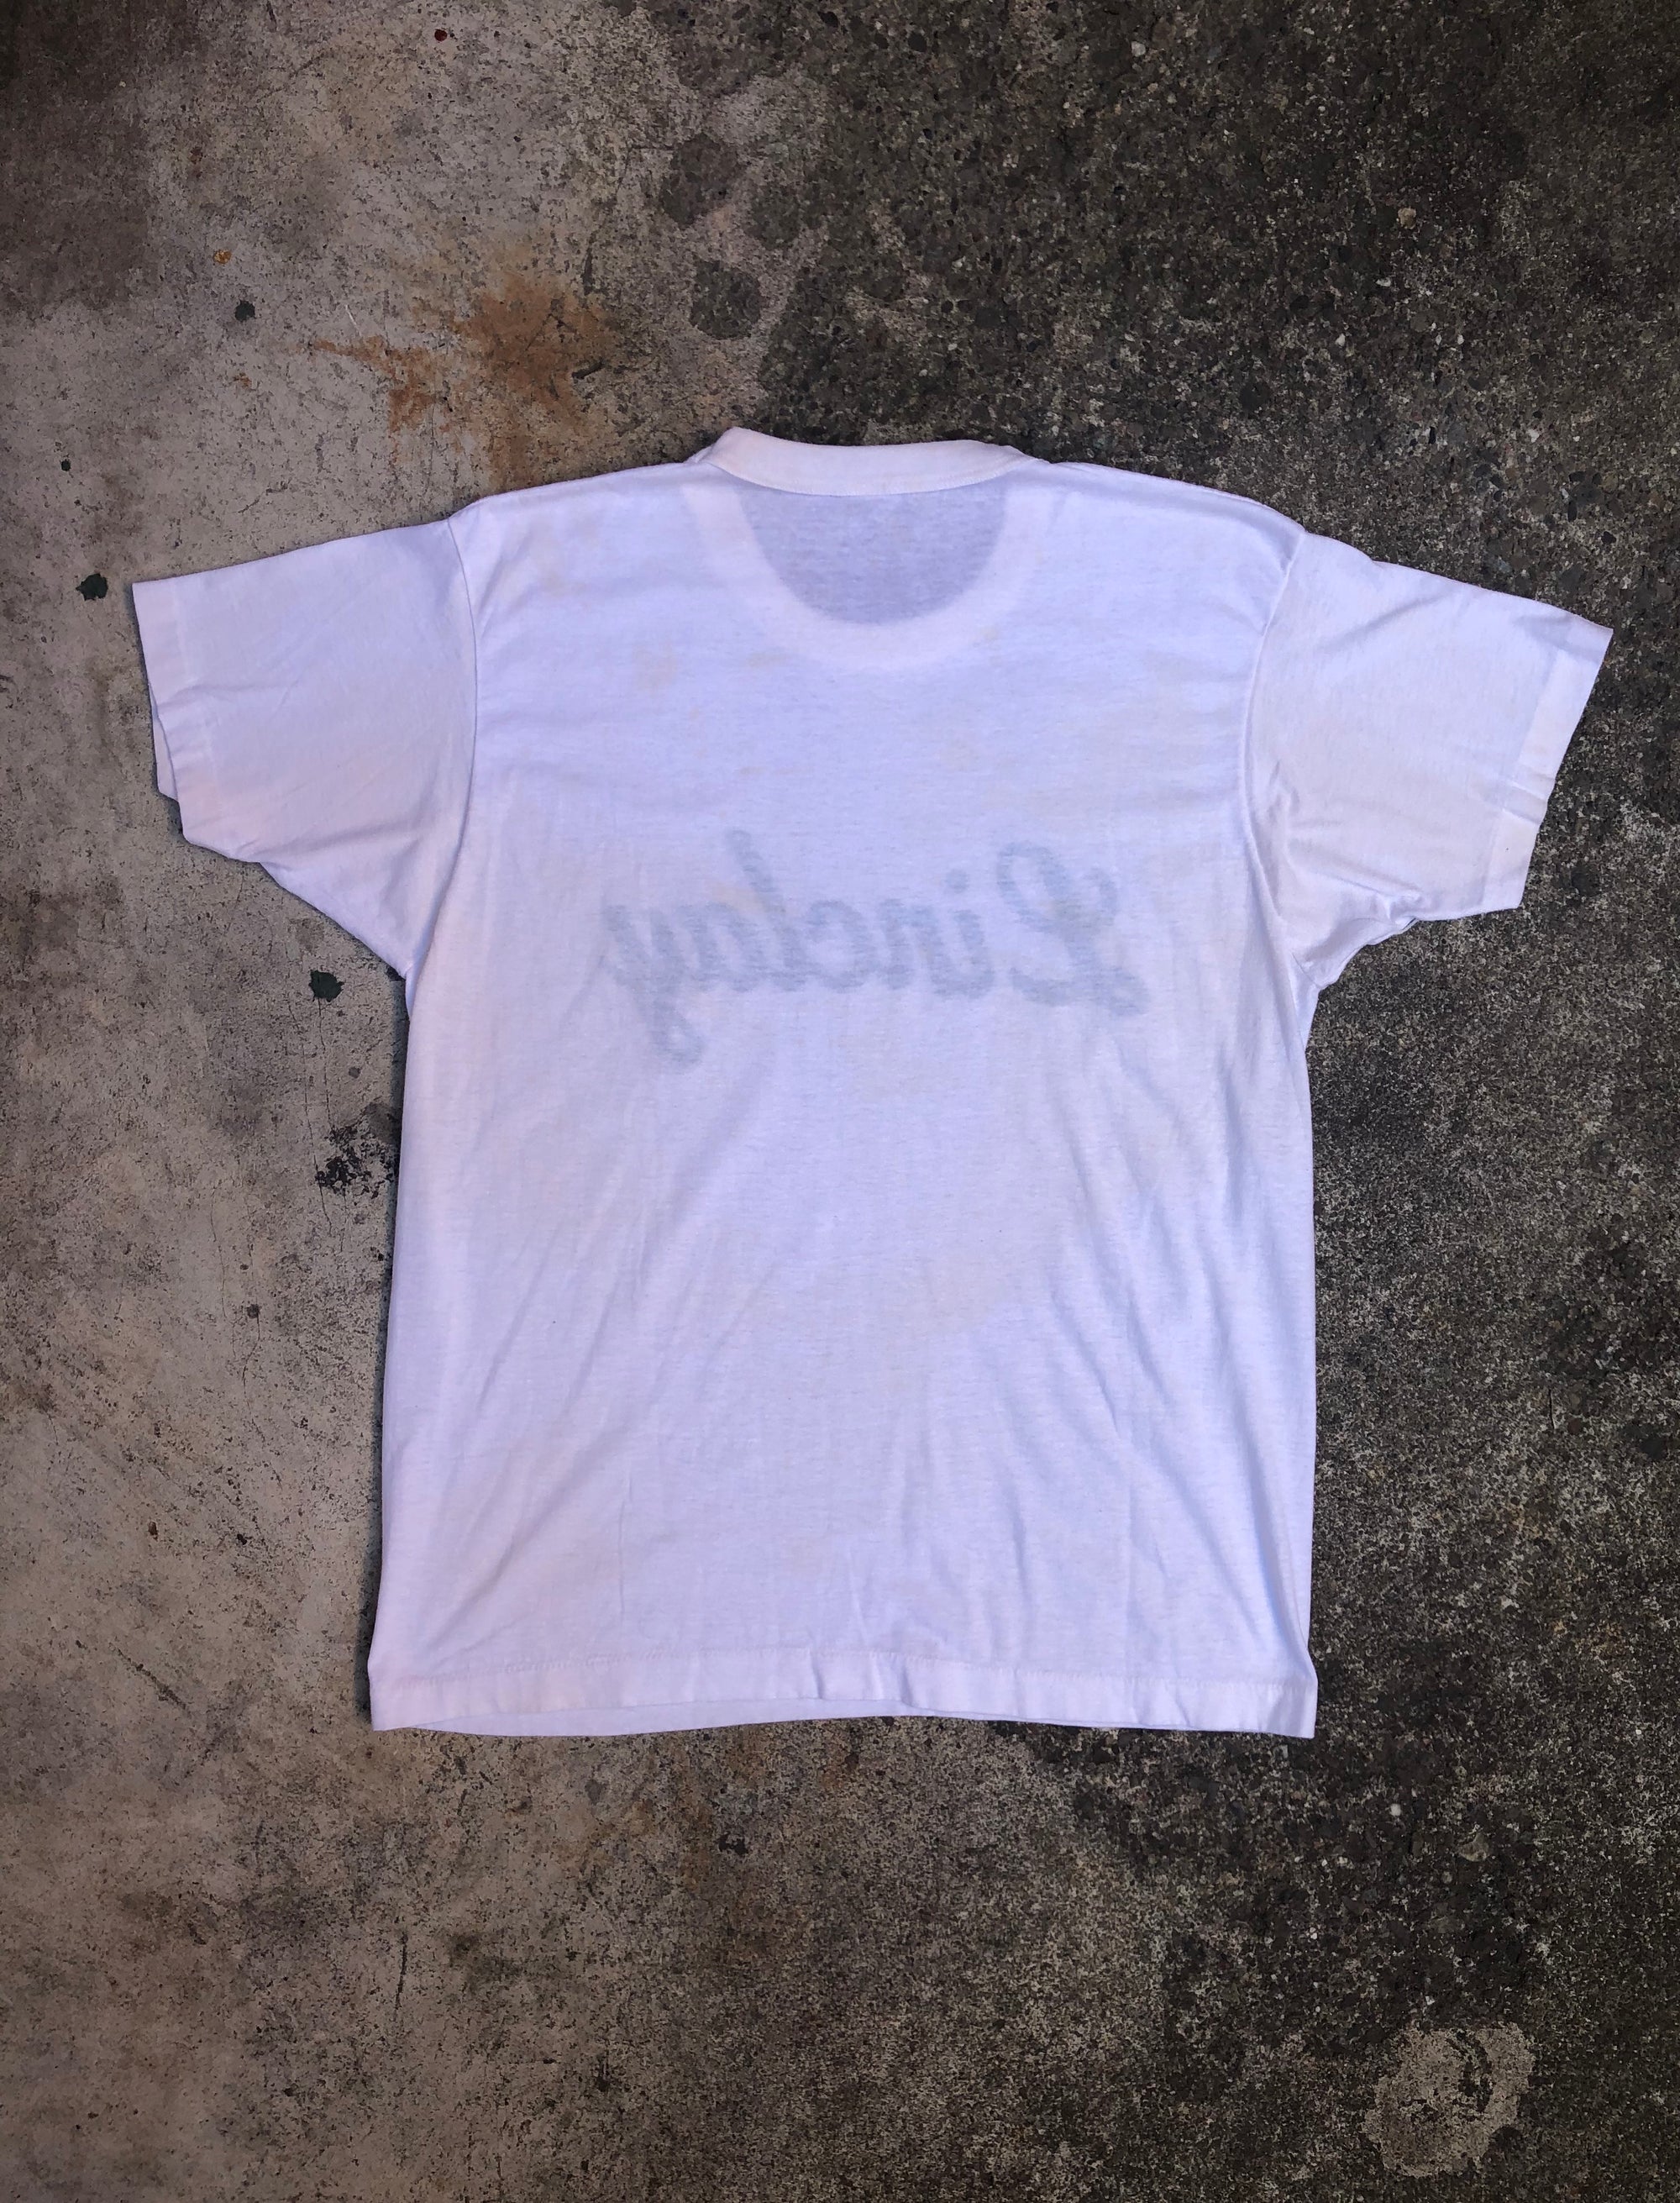 1980s White Green “Linclay” Tee